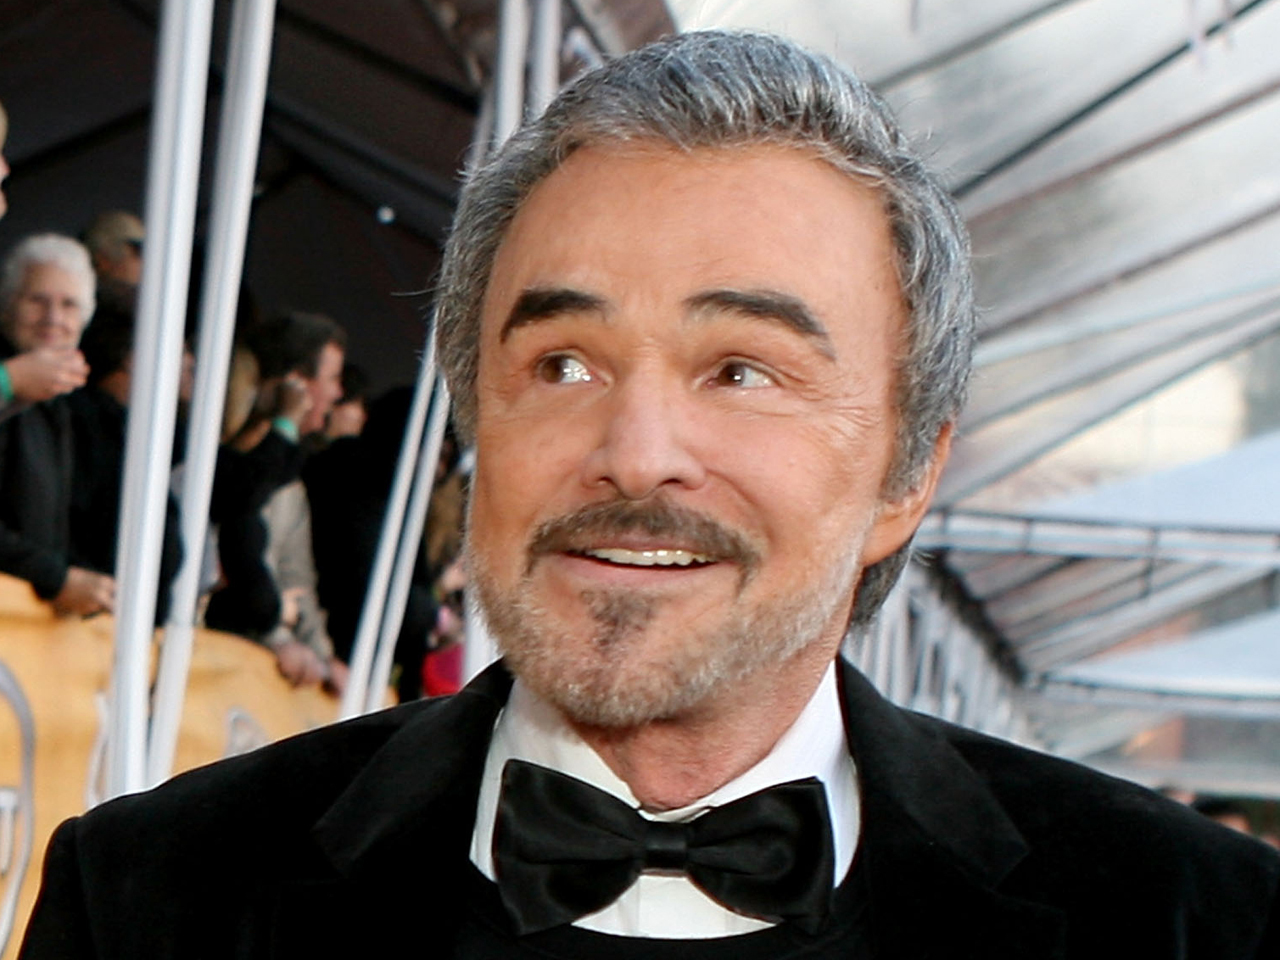 Burt Reynolds died today star of "Boogie Nights, "Deliverance" was 82